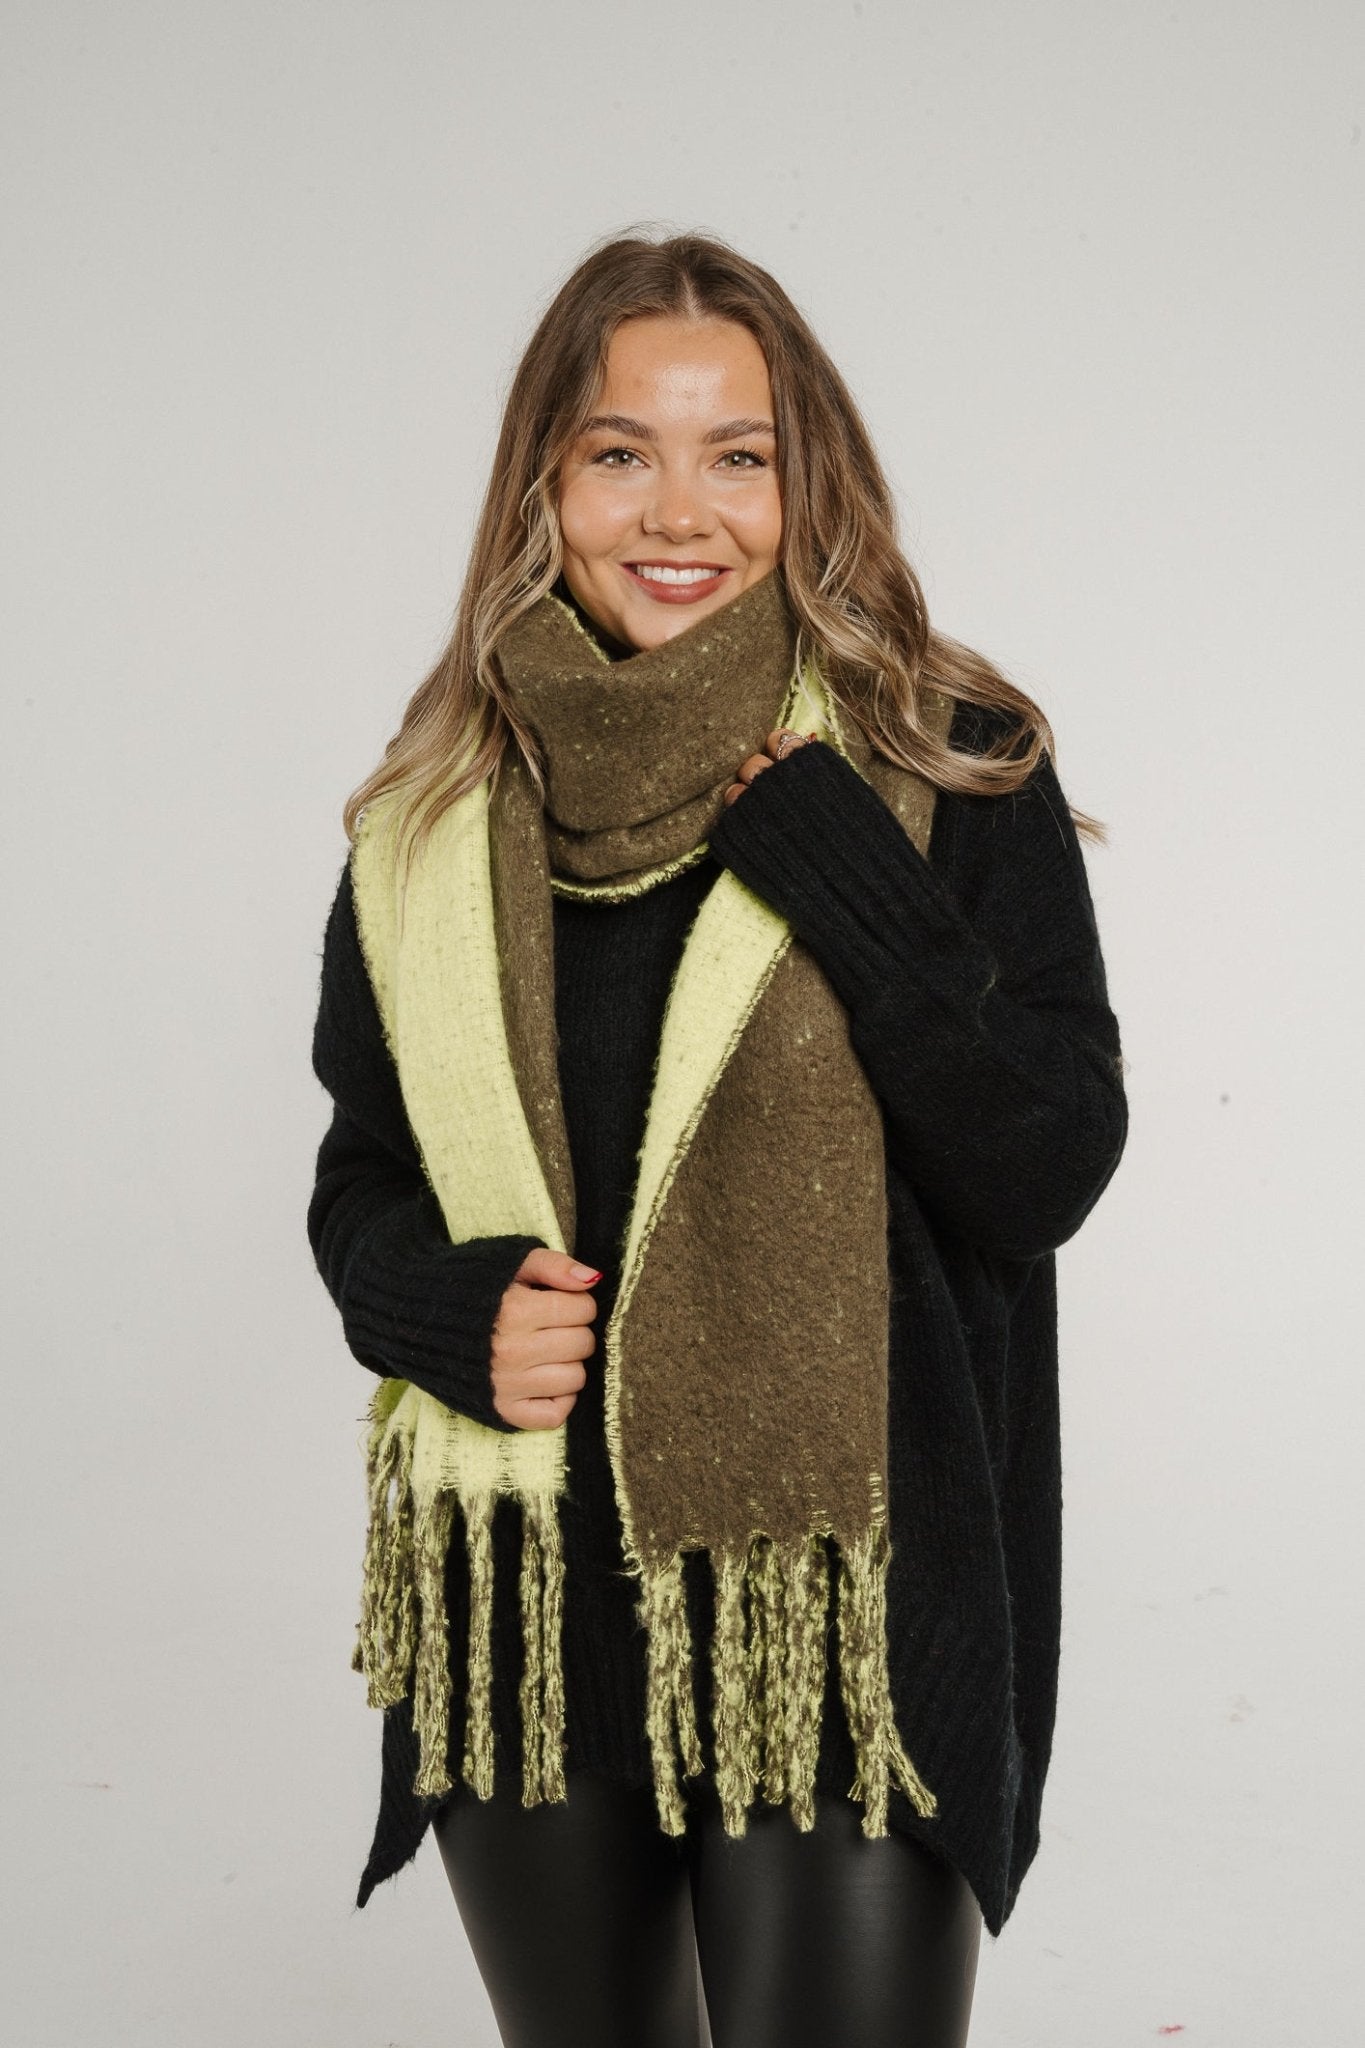 Becca Chunky Knit Scarf In Lime Mix - The Walk in Wardrobe